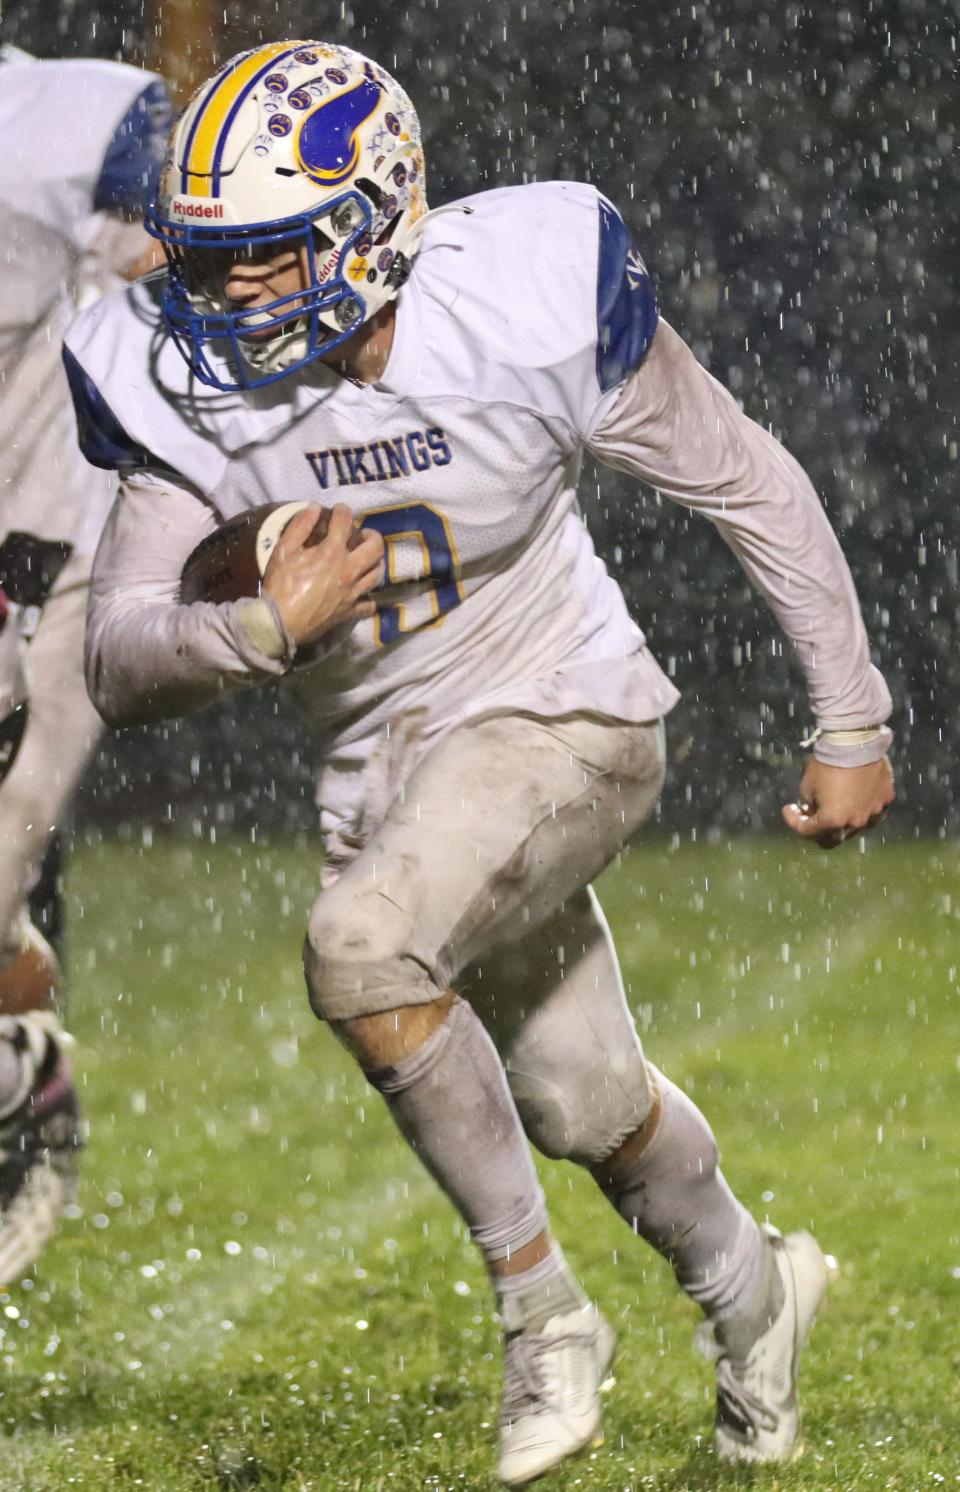 Eli Quasebarth rushes the football during the IHSAA football game against the West Central Trojans on Oct. 13, 2023 at West Central High School in Francesville, Ind. North White defeated West Central, 20-18.